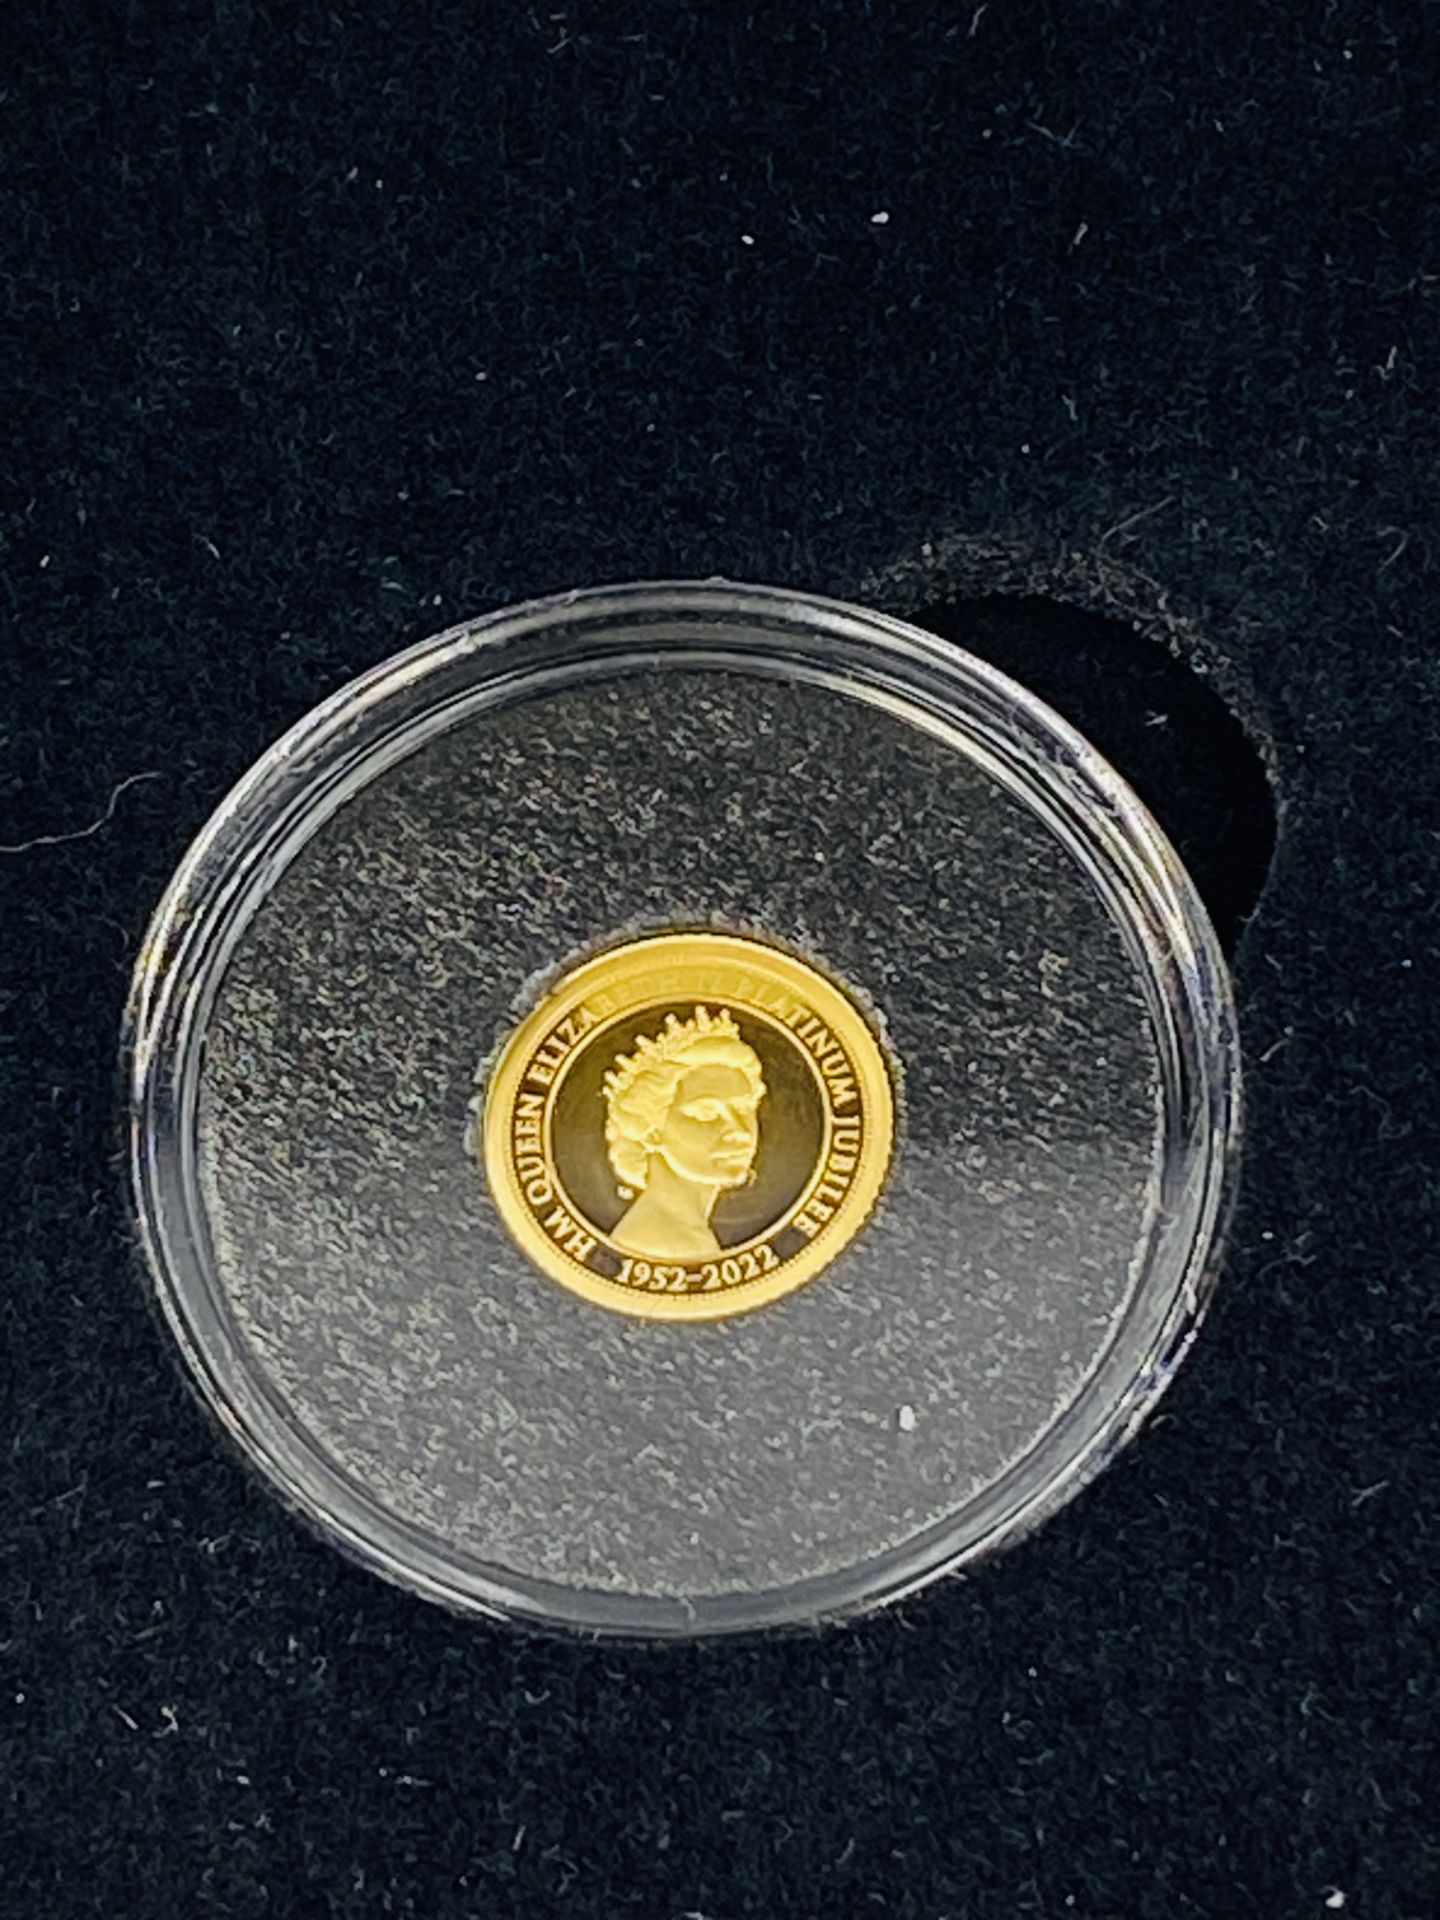 Platinum Jubilee half gram gold £5 coin, in box with Certificate of Authenticity. - Image 2 of 3